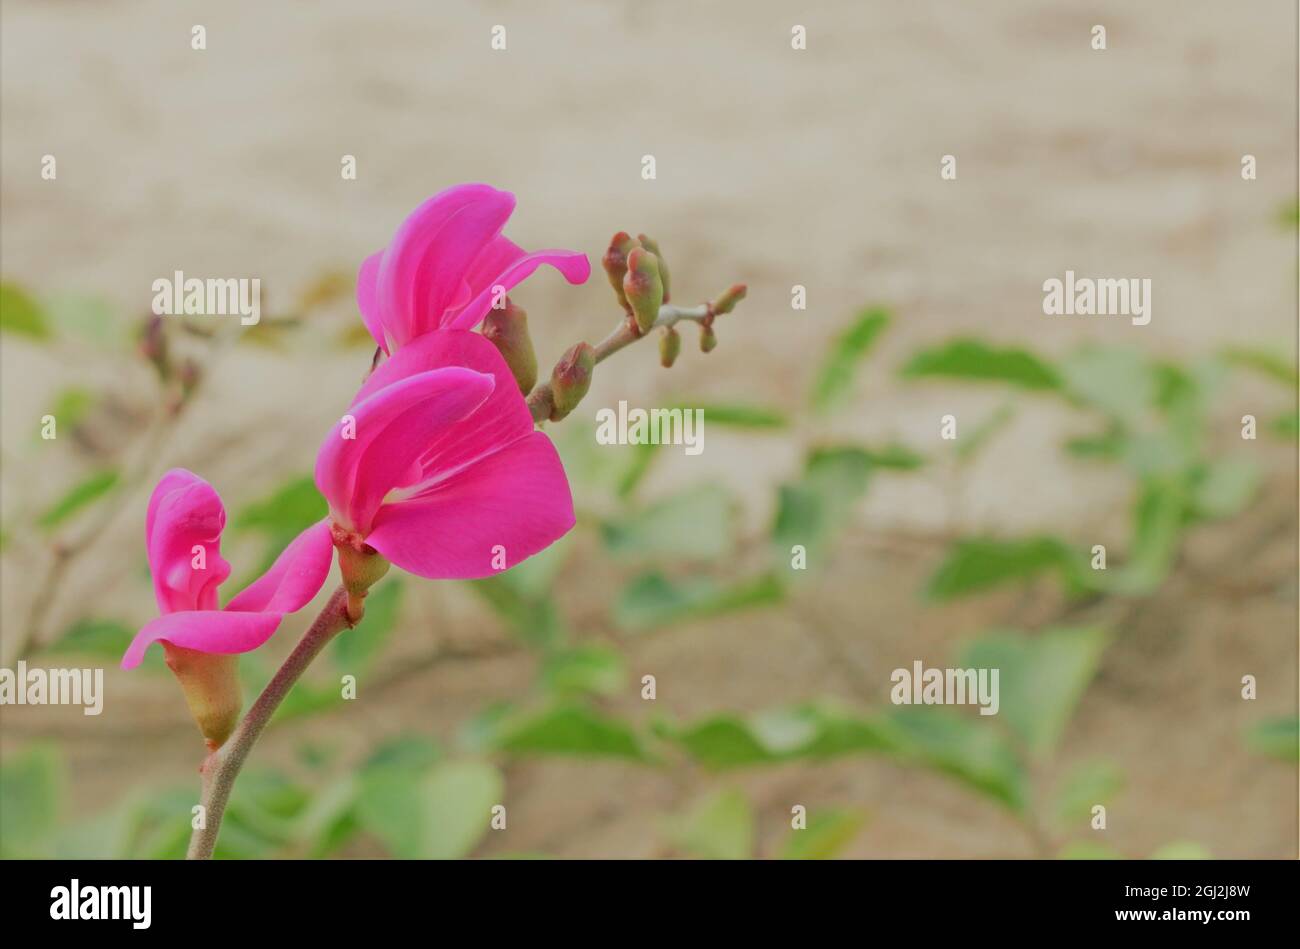 Bright pink flower growing on sand Stock Photo